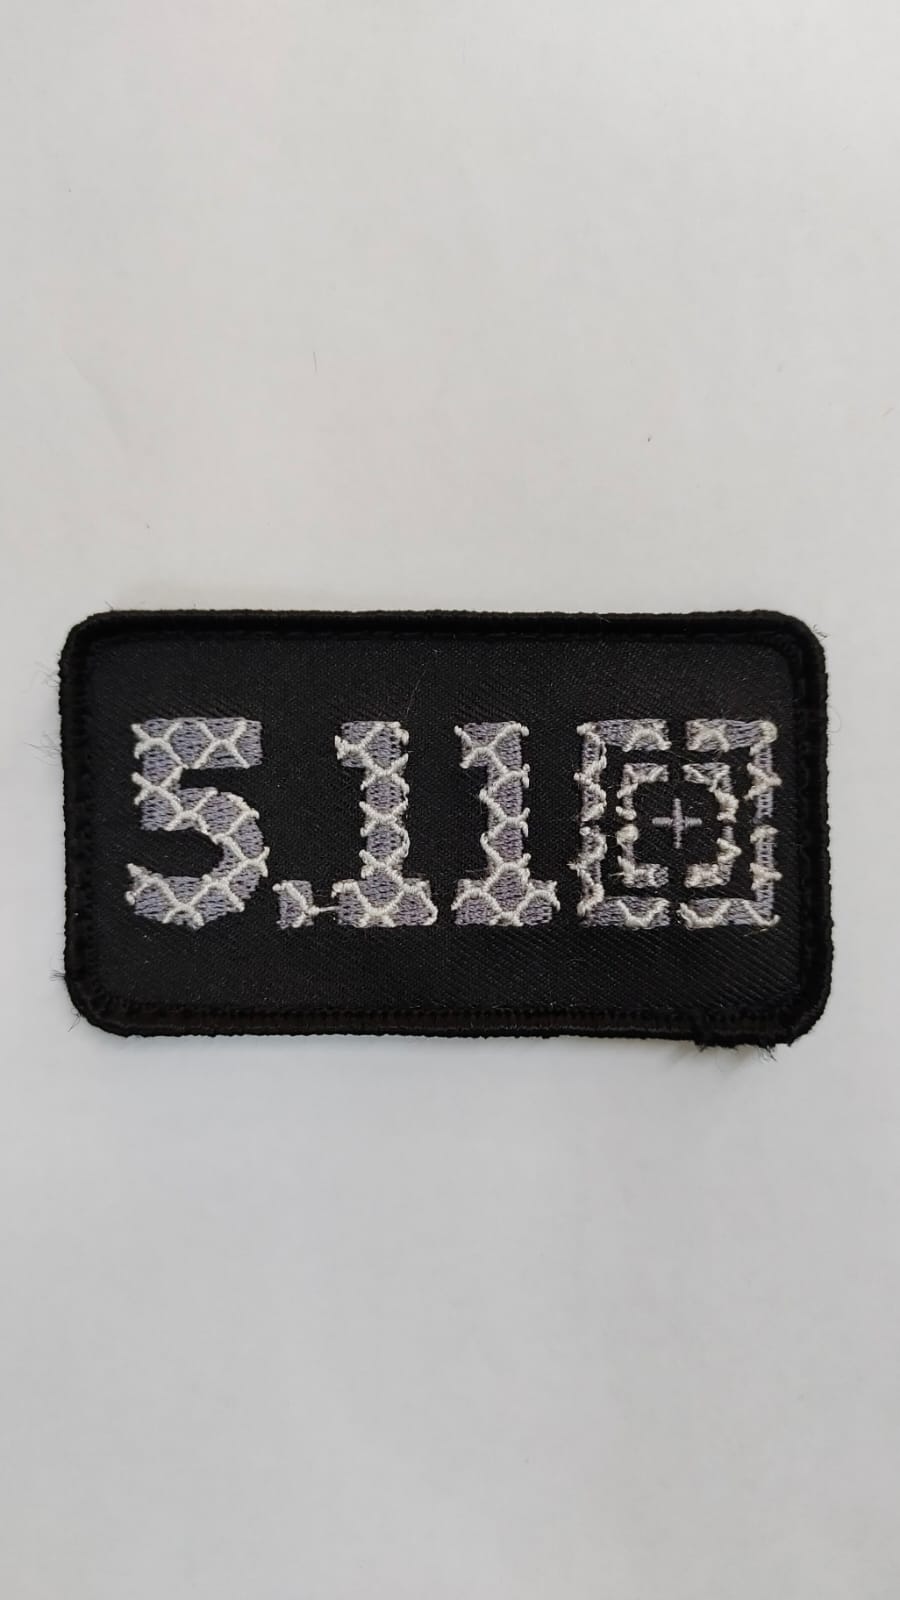 Missions - 5.11 Embroidery 5x9cm Patch